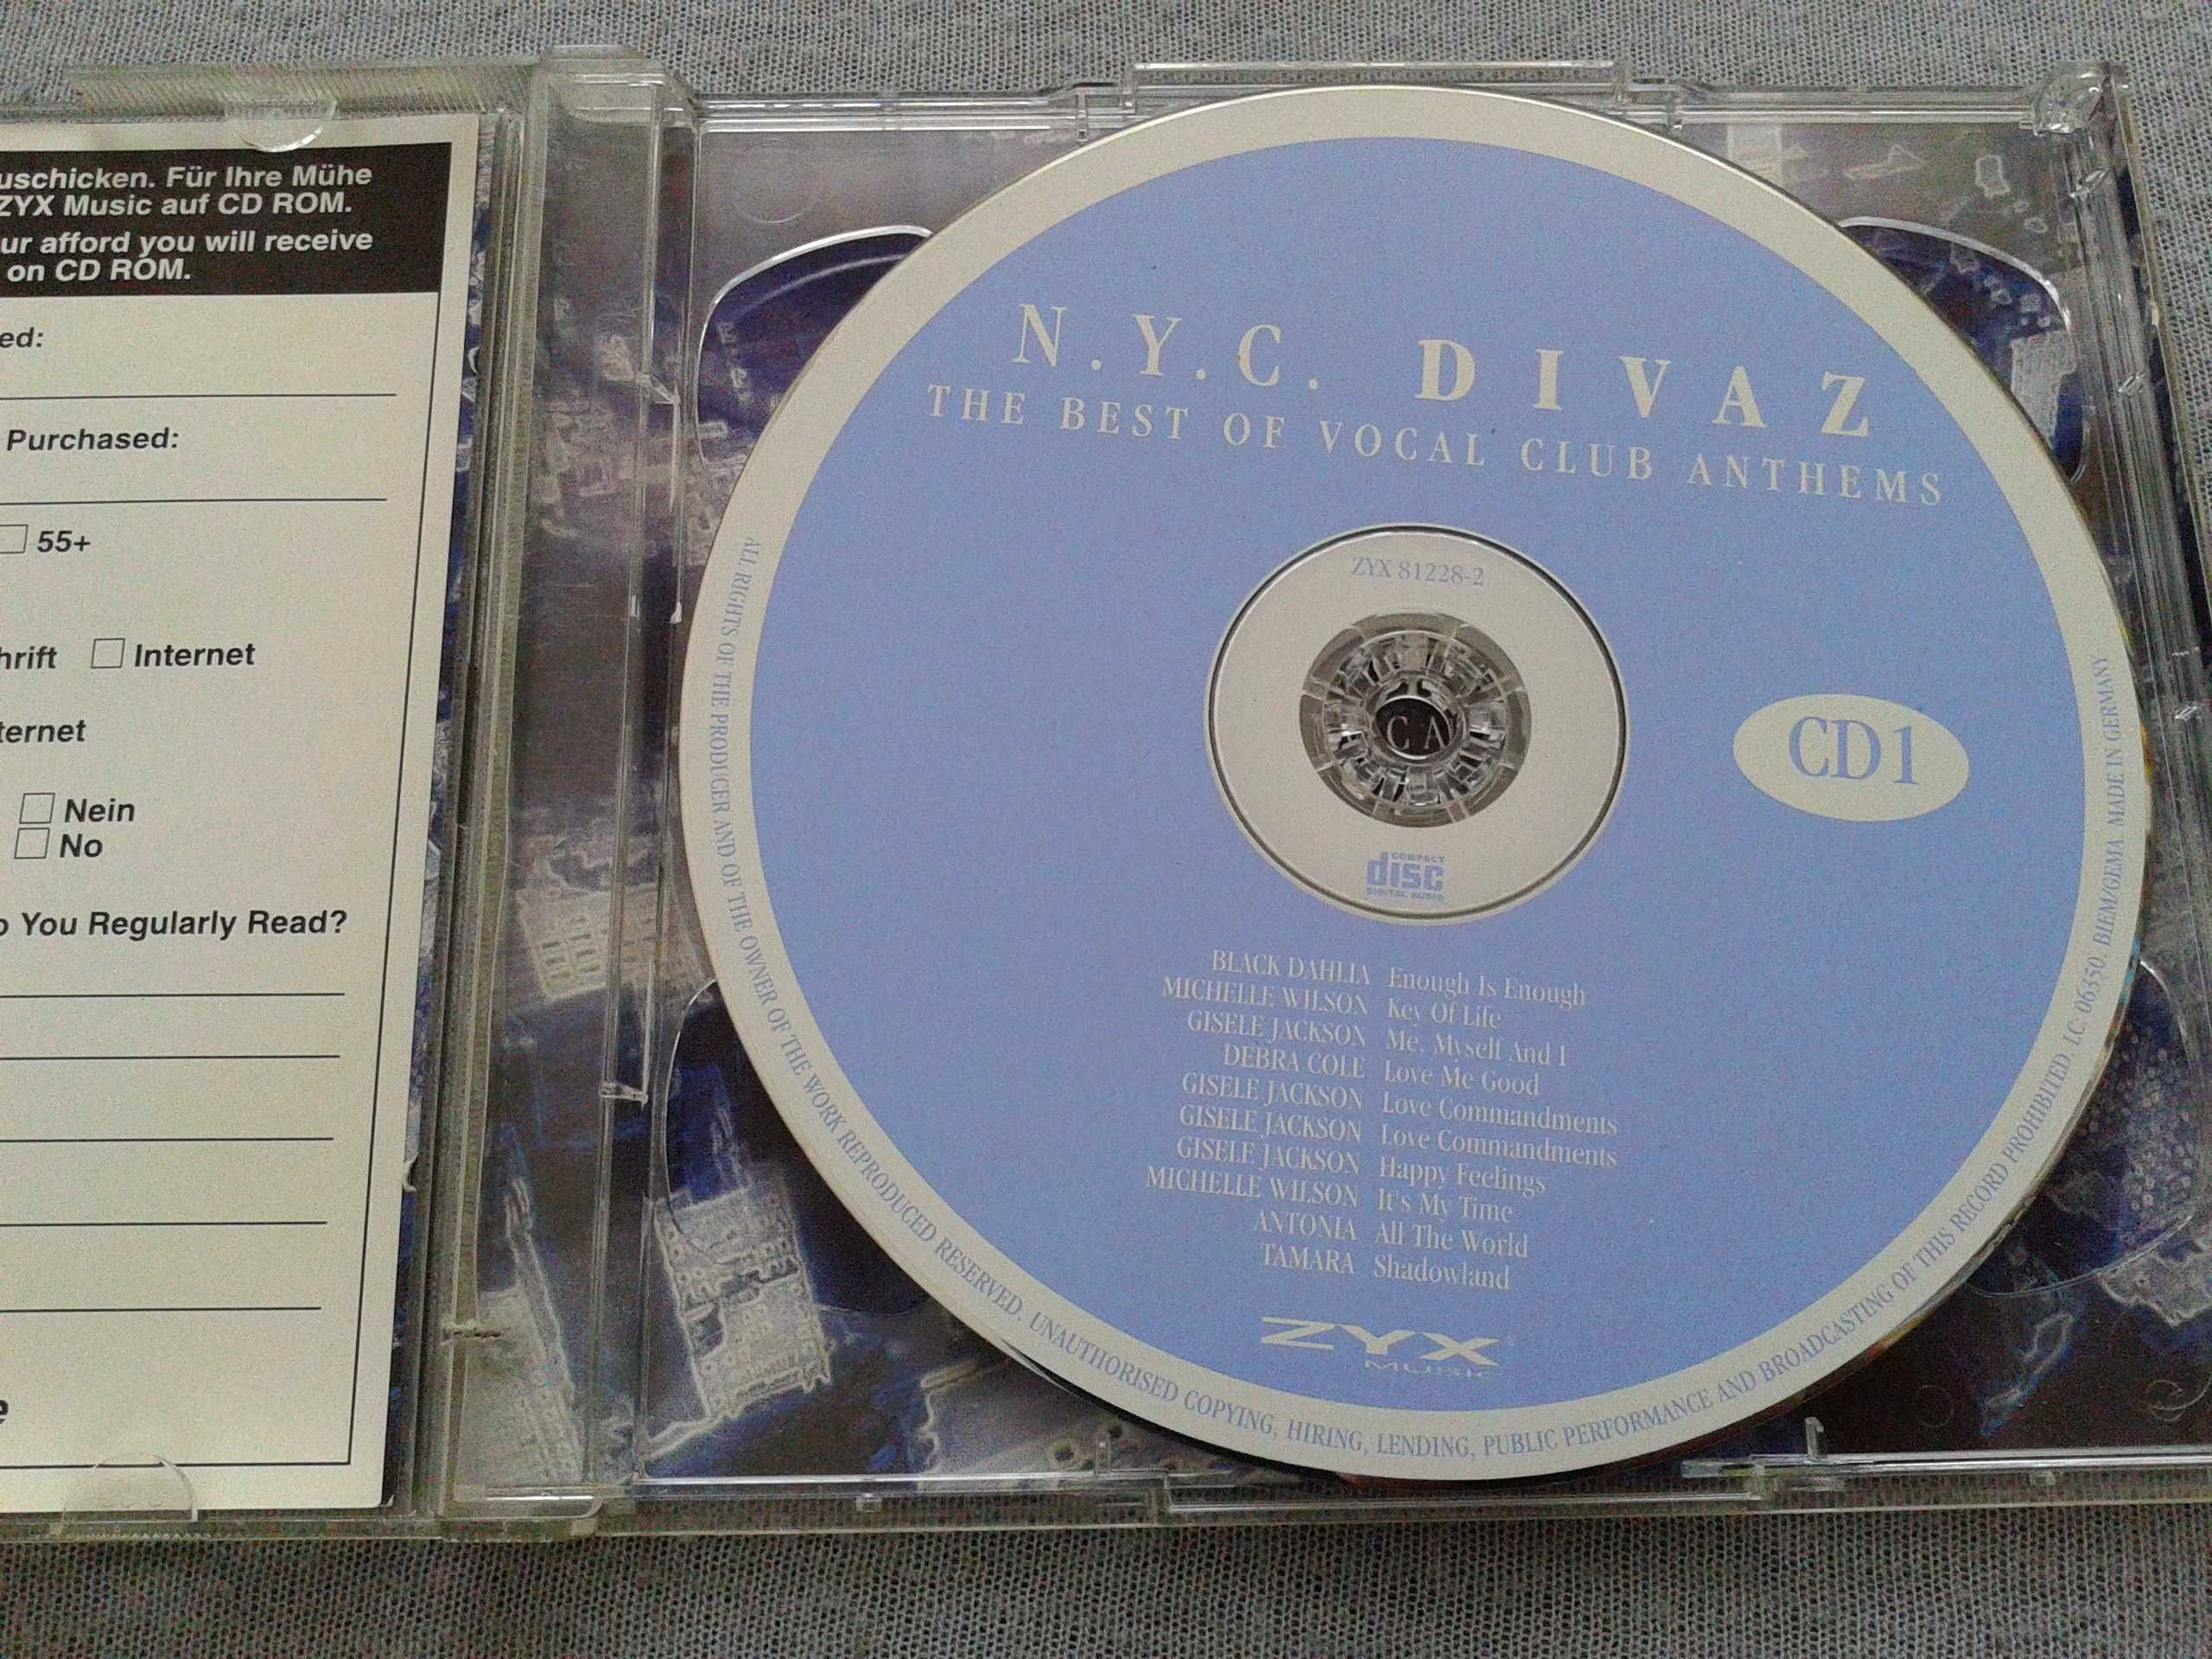 N.Y.C. Divaz, The Best Of Vocal Club Anthems  2CD